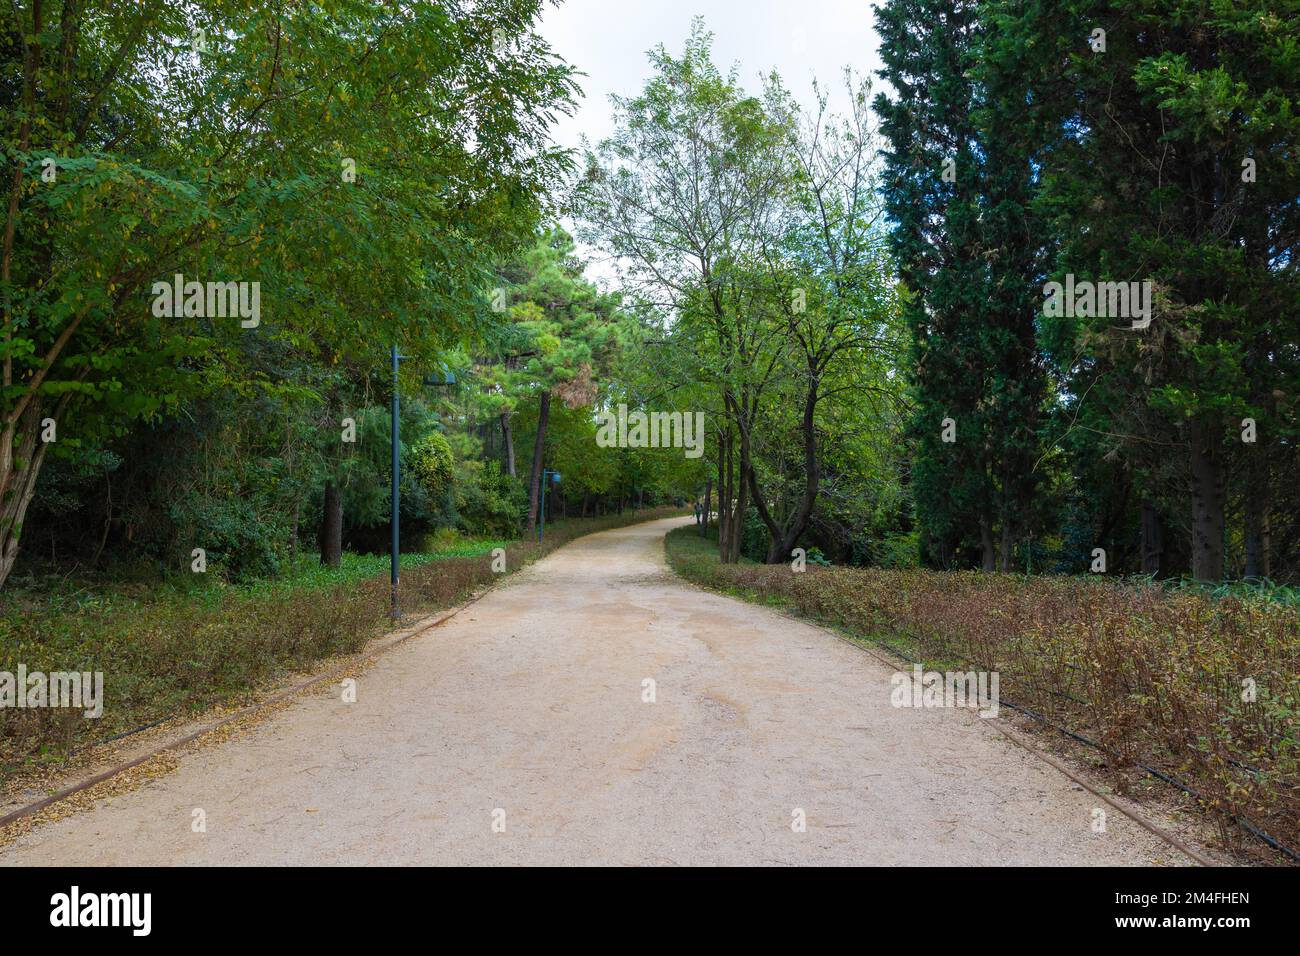 Haciosman or Ataturk City Forest in Sariyer Istanbul. Jogging trail in a park. Parks of Istanbul background photo. Stock Photo